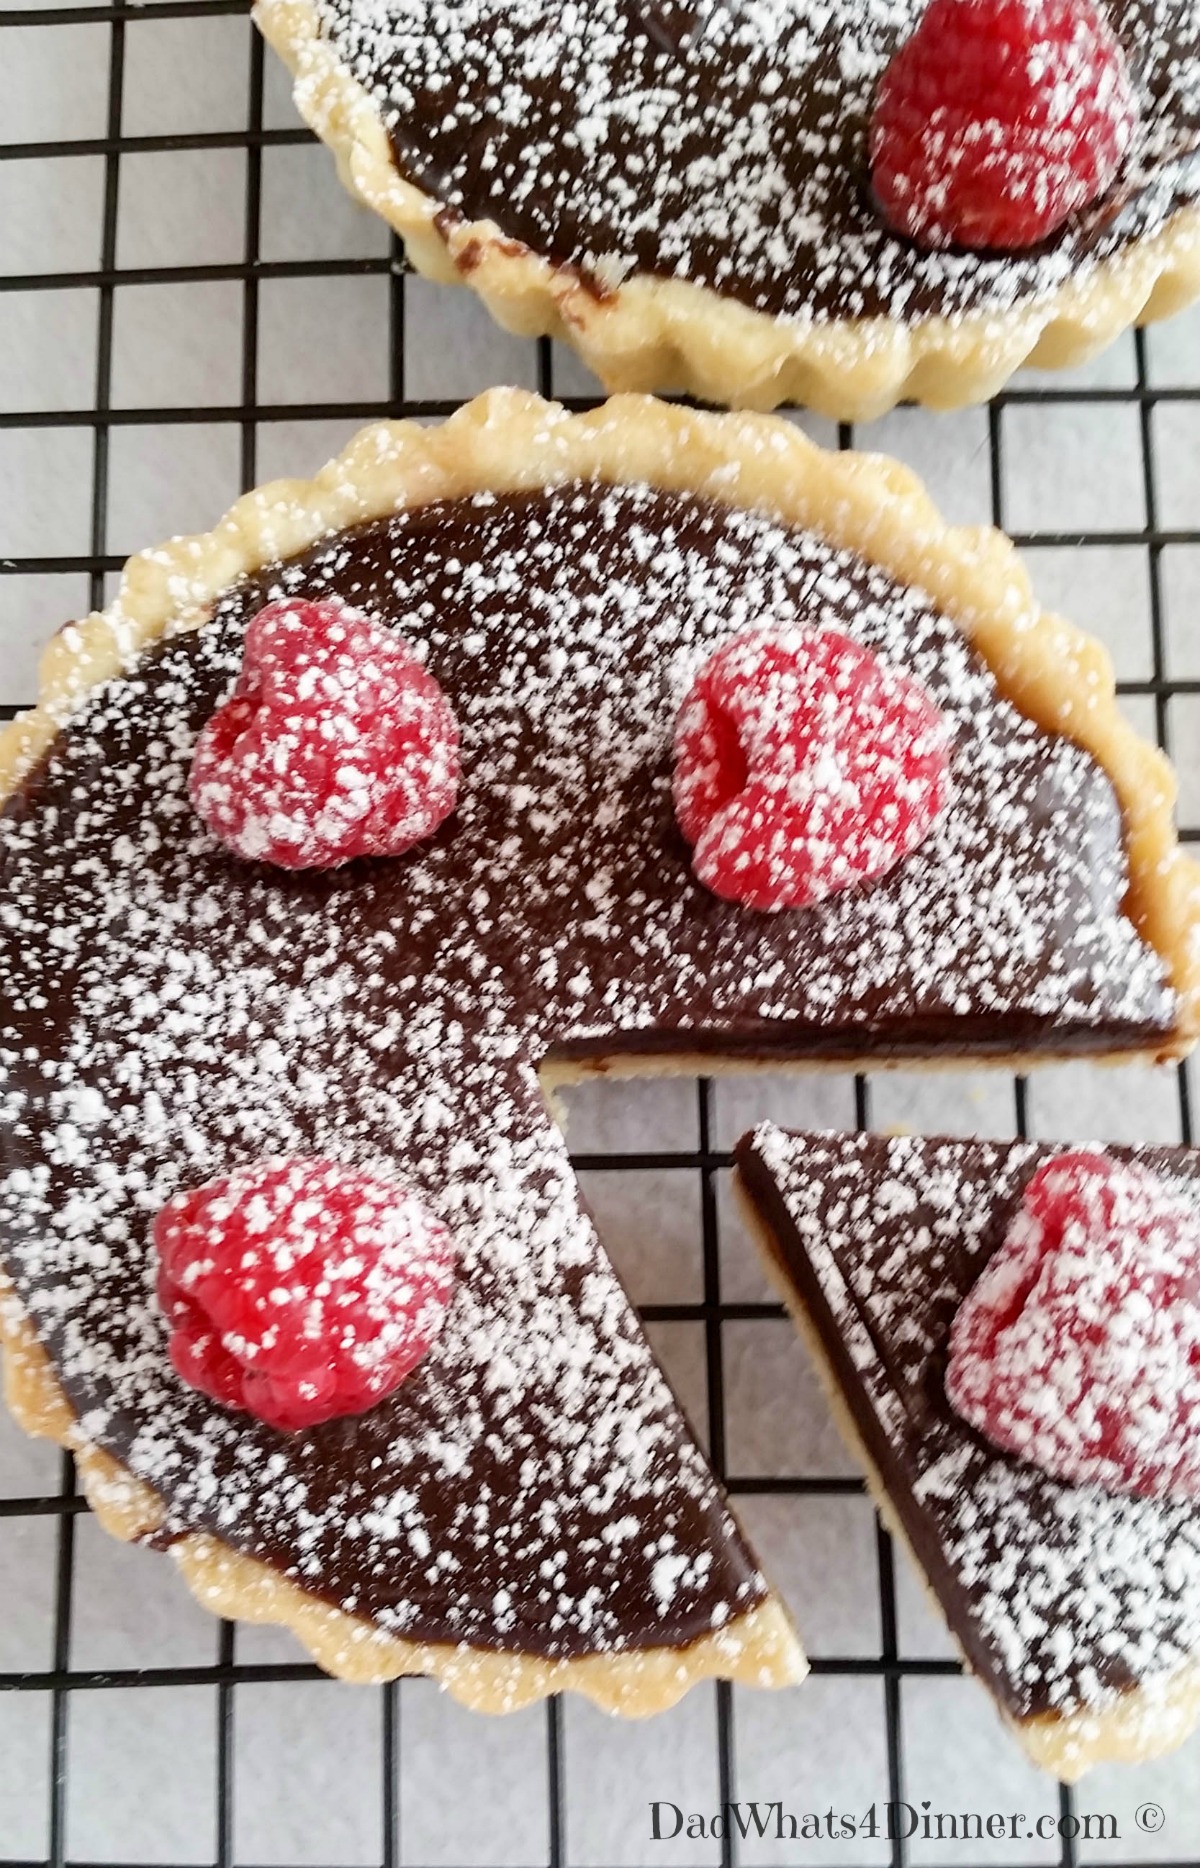 If you want to impress your significant other, make this Chocolate Raspberry Tart. The ultimate Valentine's Day dessert! | http://dadwhats4dinner.com